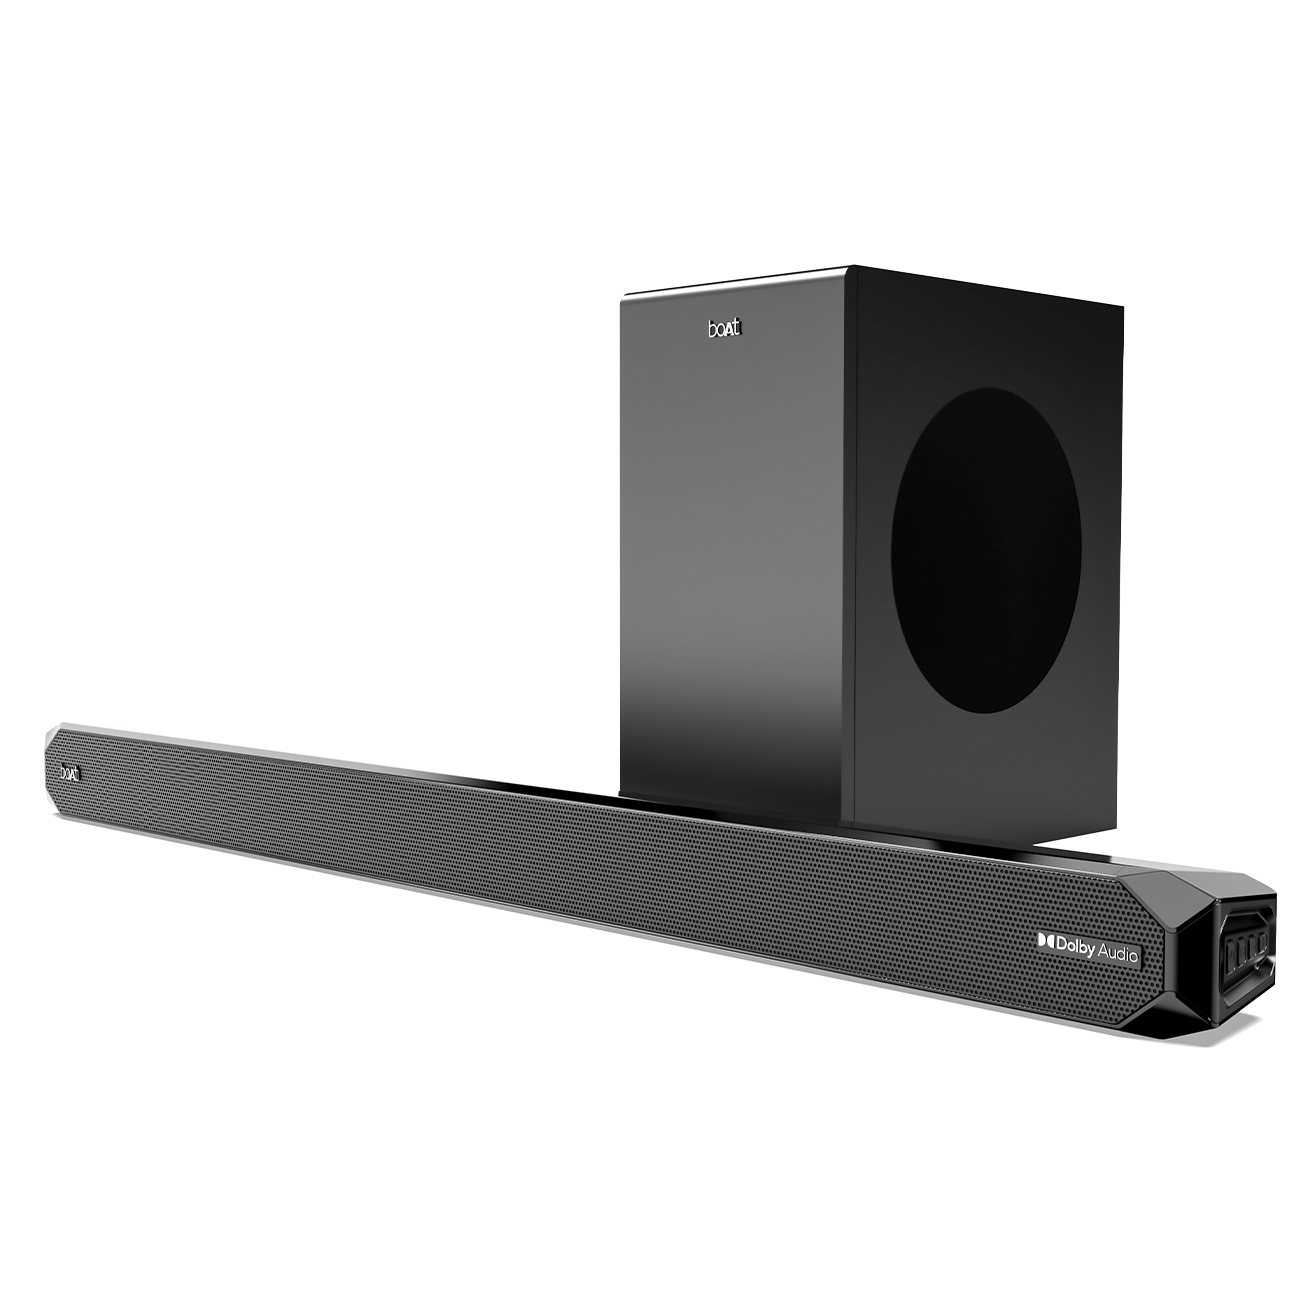 boAt Aavante Bar A2060 Dolby | 160W Dolby Soundbar, 2.1 Channel with Wired Subwoofer, Master Remote Control, Multi Connectivity